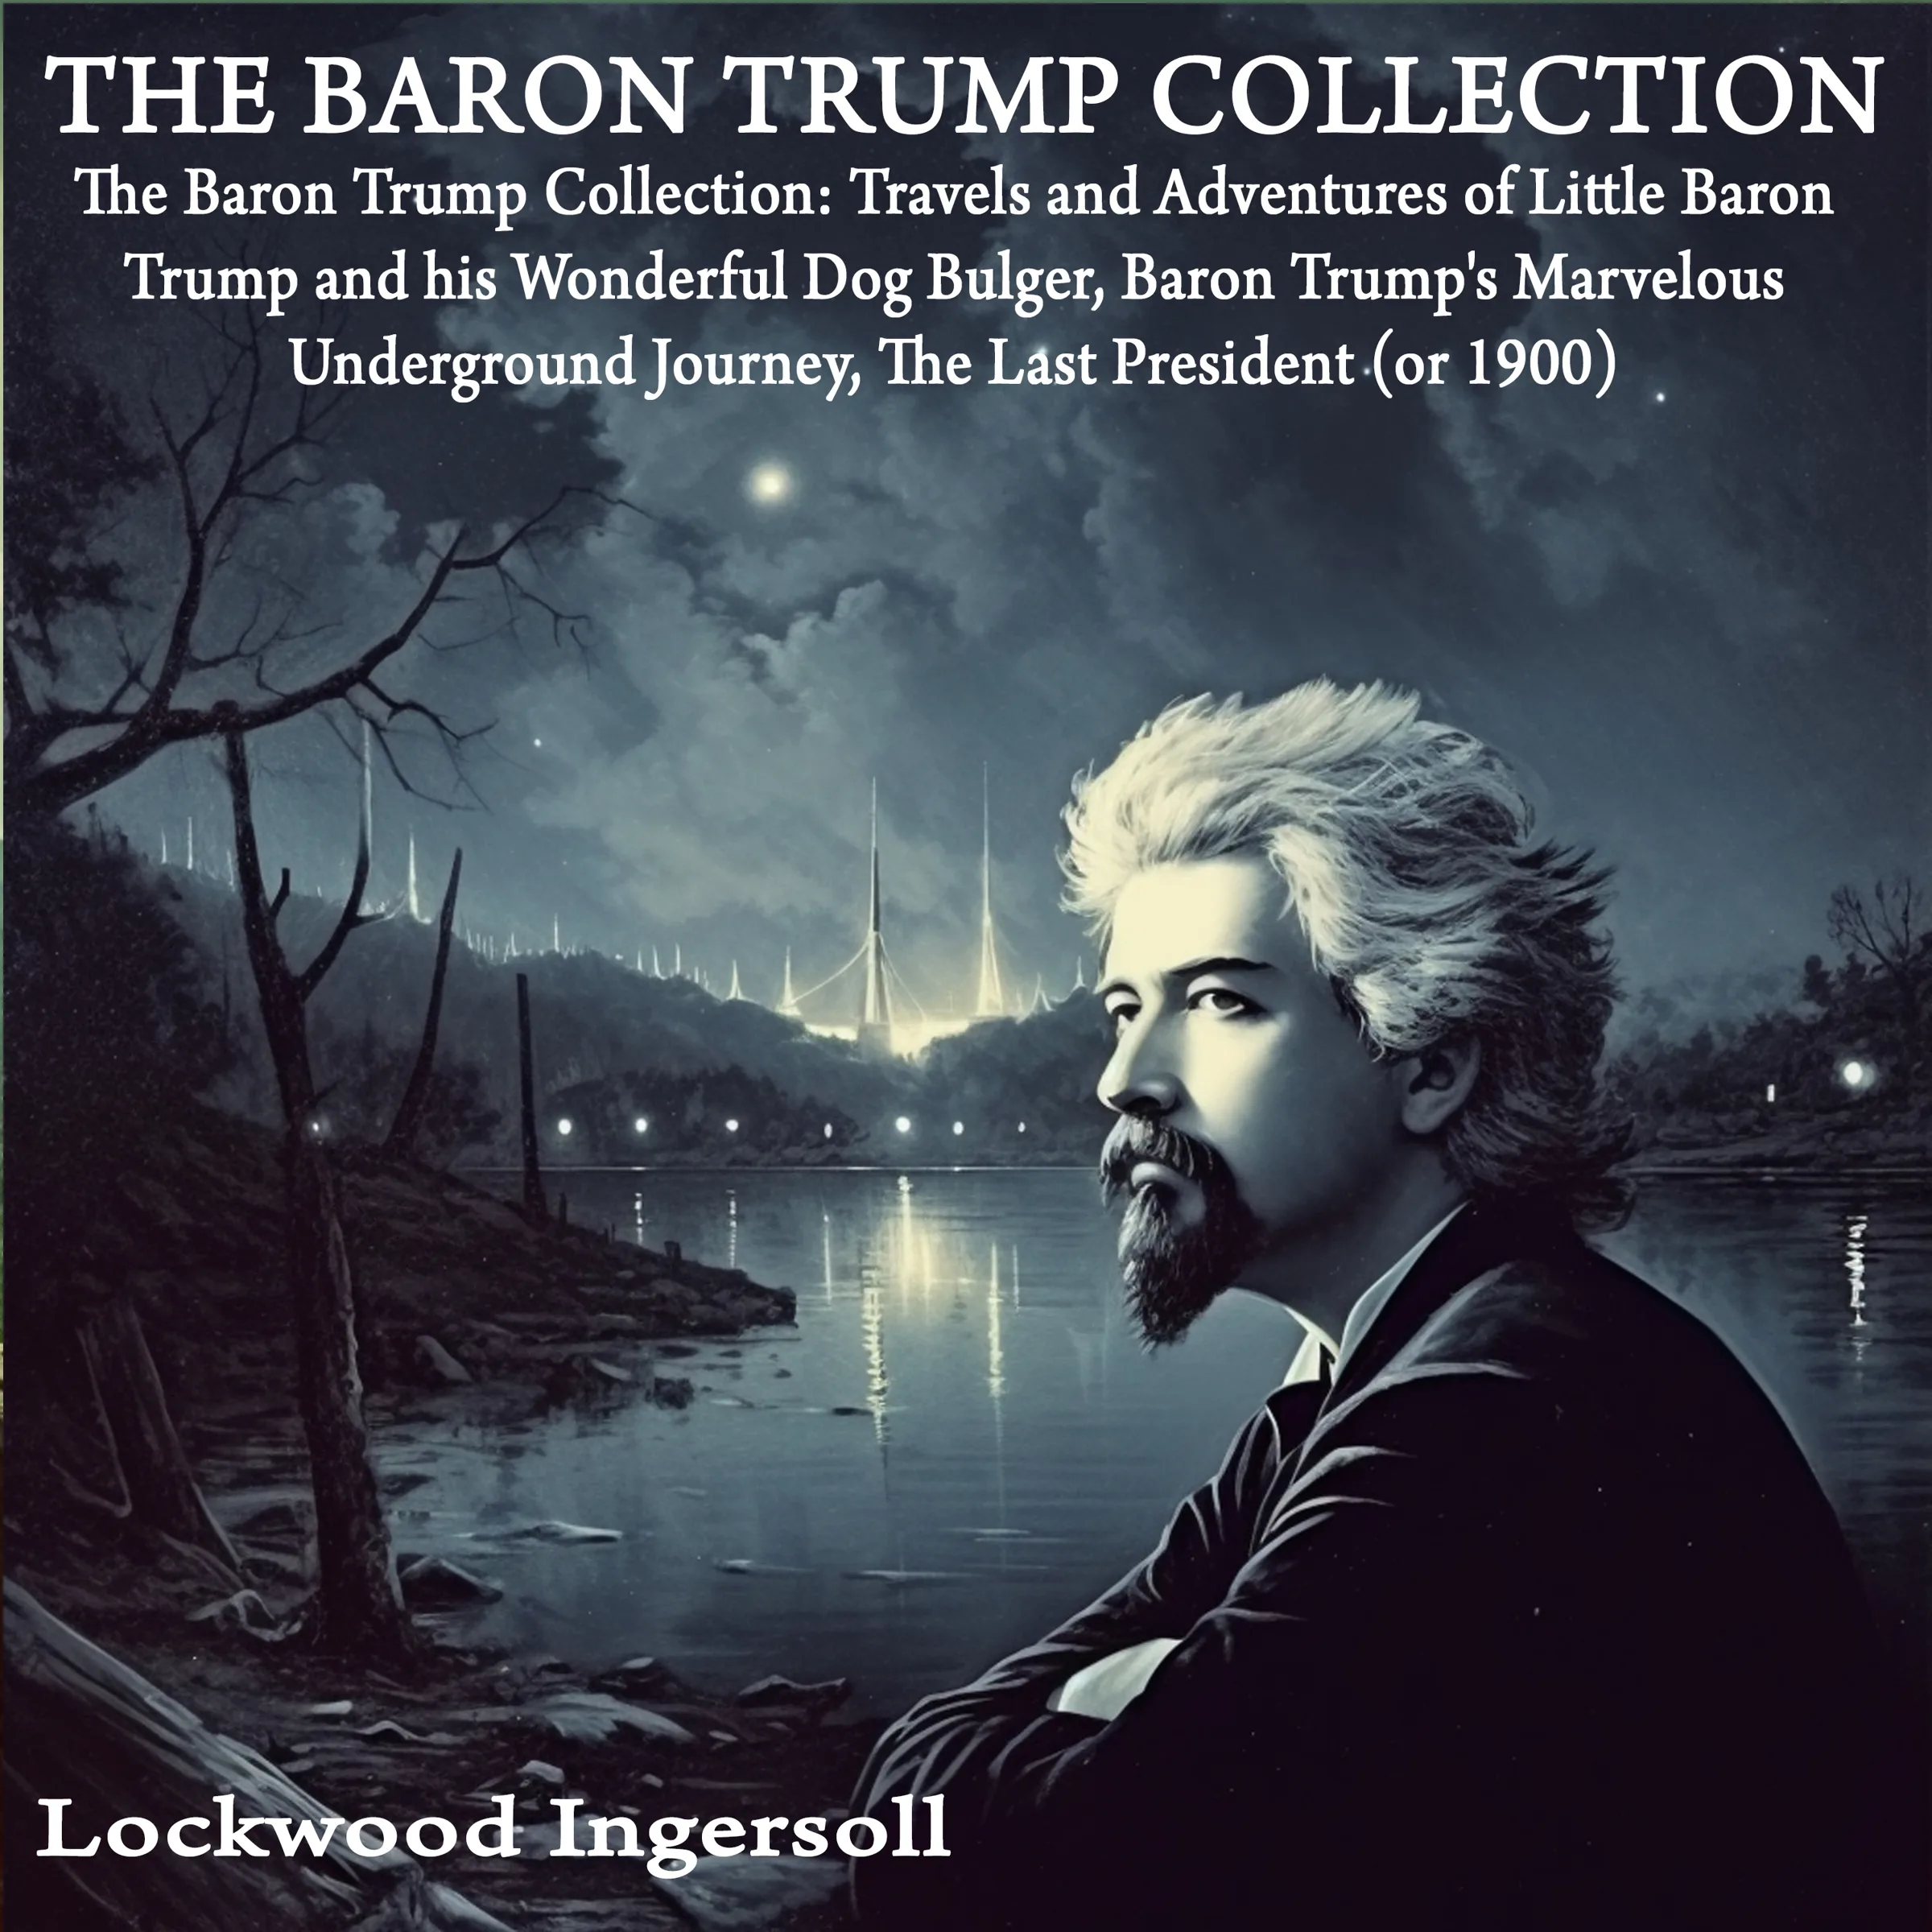 The Baron Trump Collection from Lockwood Ingersoll